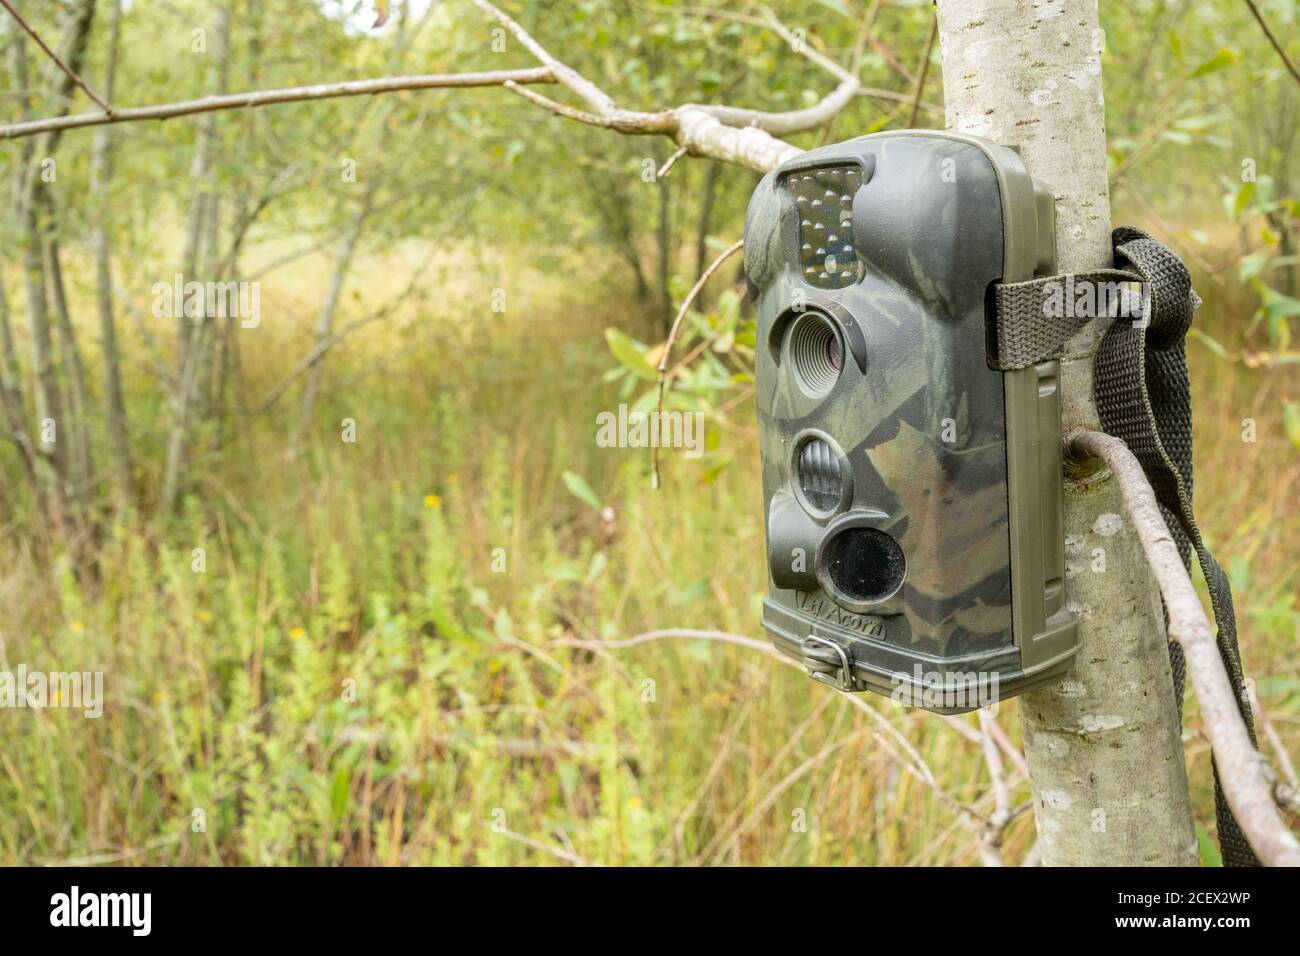 Trail cam or camera trap set up in a tree to monitor and photograph wildlife visiting a wetland area, UK Stock Photo